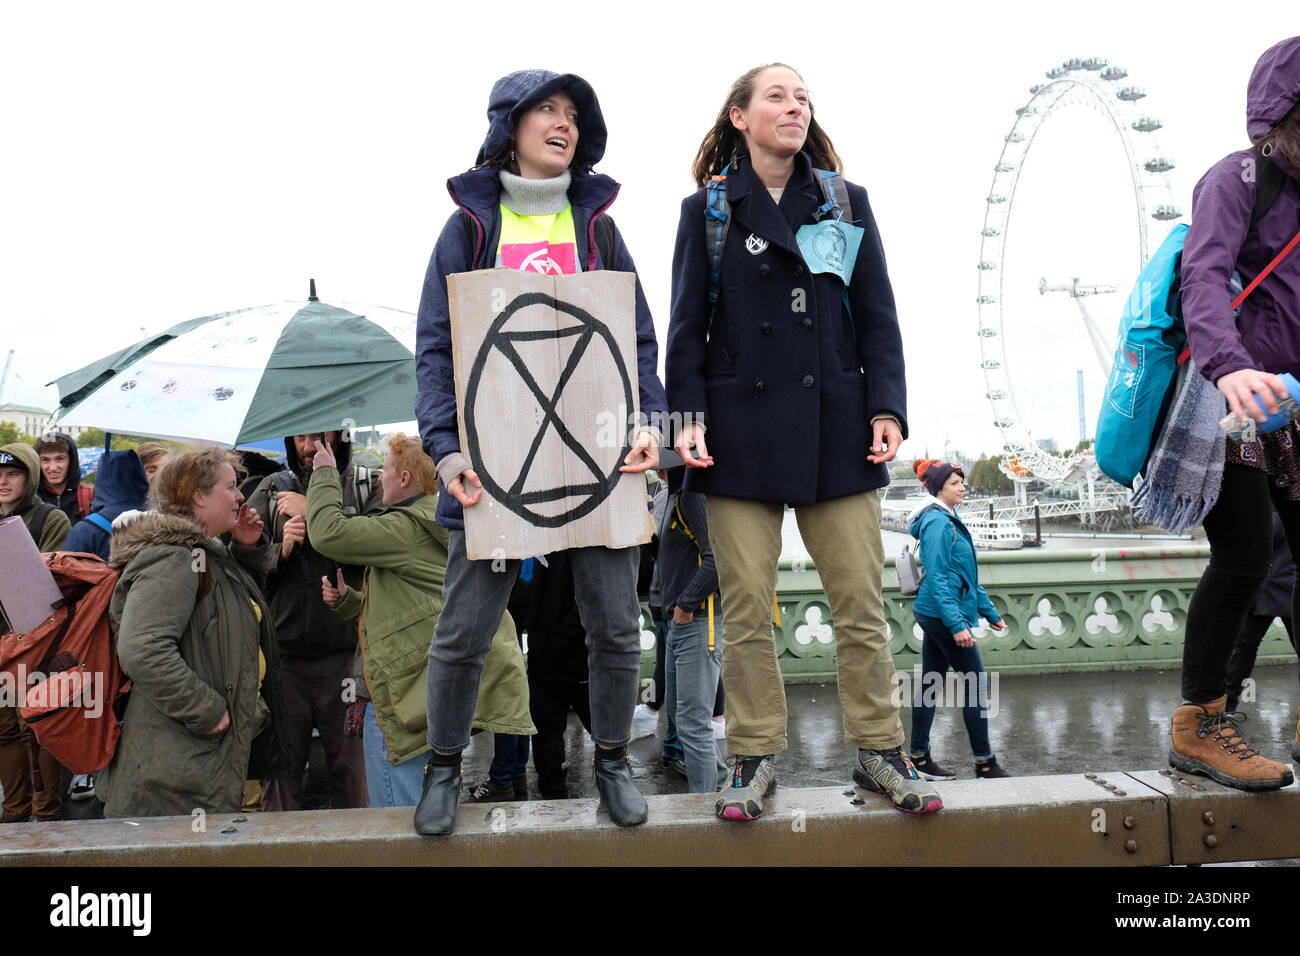 Westminster, London, UK - Monday 7th October 2019 - Two young female Extinction Rebellion XR climate protesters enjoy the wind and rain in the middle of Westminster Bridge on Day 1 of the XR protest. Photo Steven May / Alamy Live News Stock Photo